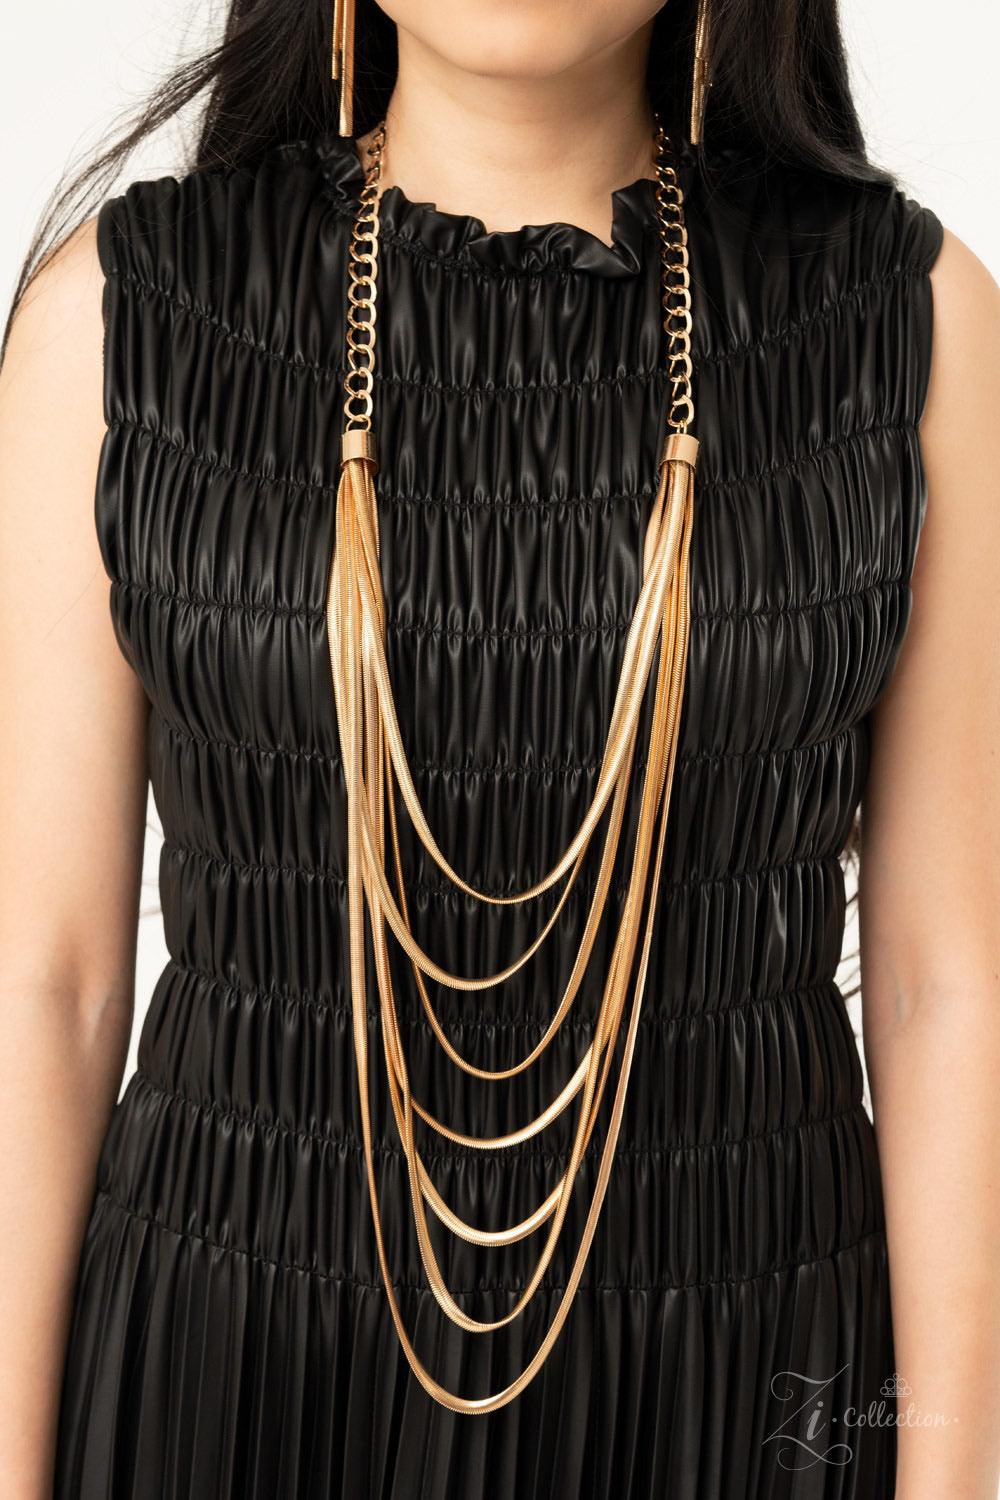 Paparazzi Accessories Commanding 💗💗ZiCollection $25💗💗 Dramatically capped in bold fittings, lengthened rows of gold herringbone chains layer flawlessly together across the chest. The sleek display attaches to strands of oversized gold links, adding a